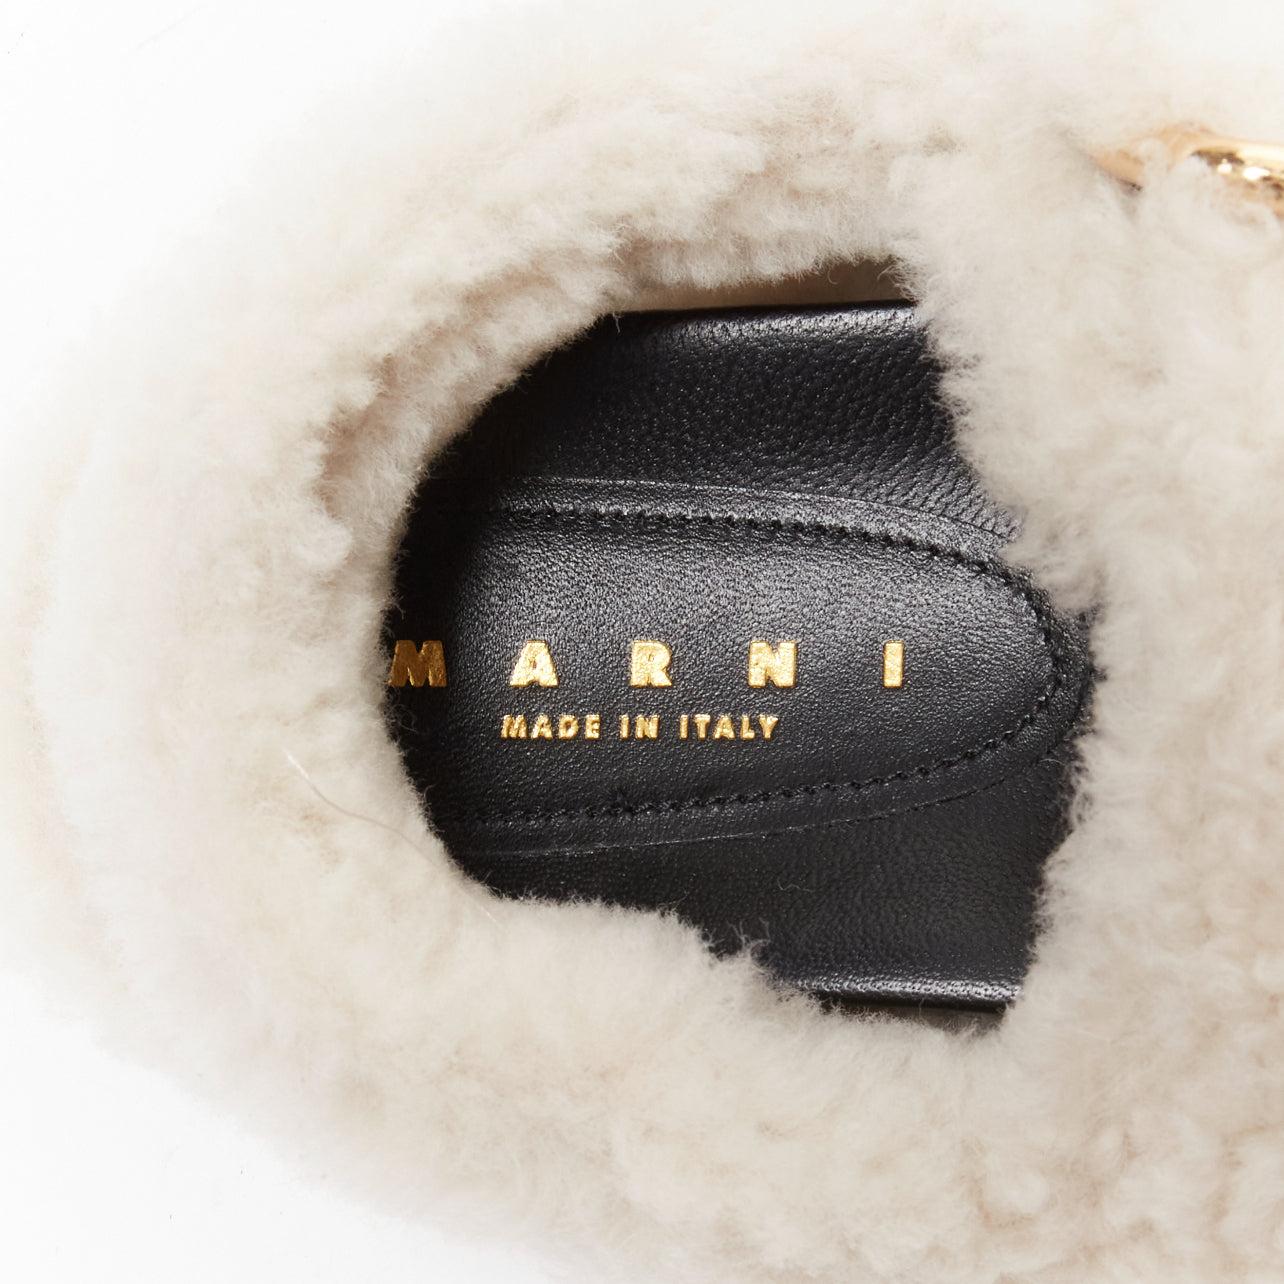 MARNI white shearling gold buckles double strap black leather lined flat sandals For Sale 5